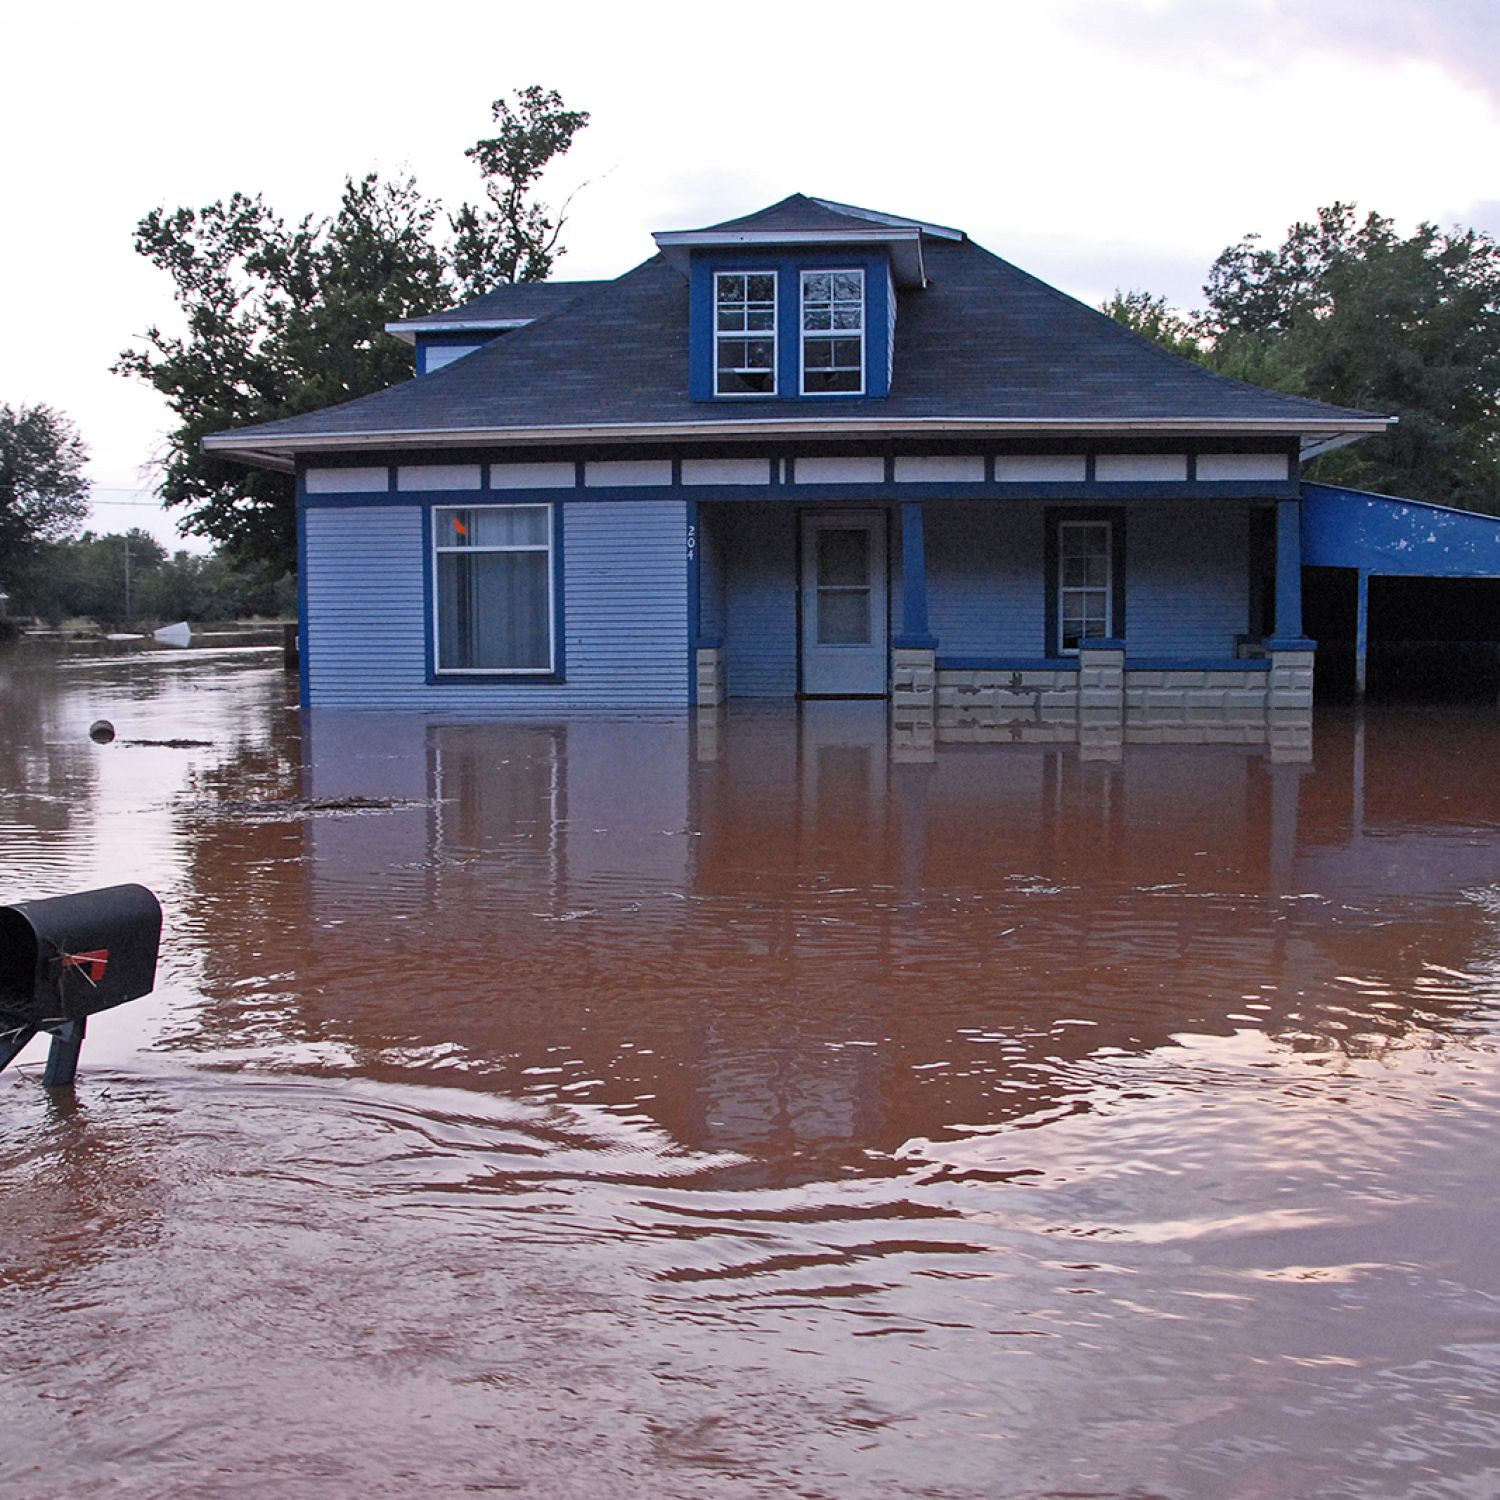 Home Flooding Protection Home Flooding Prevention Ideas